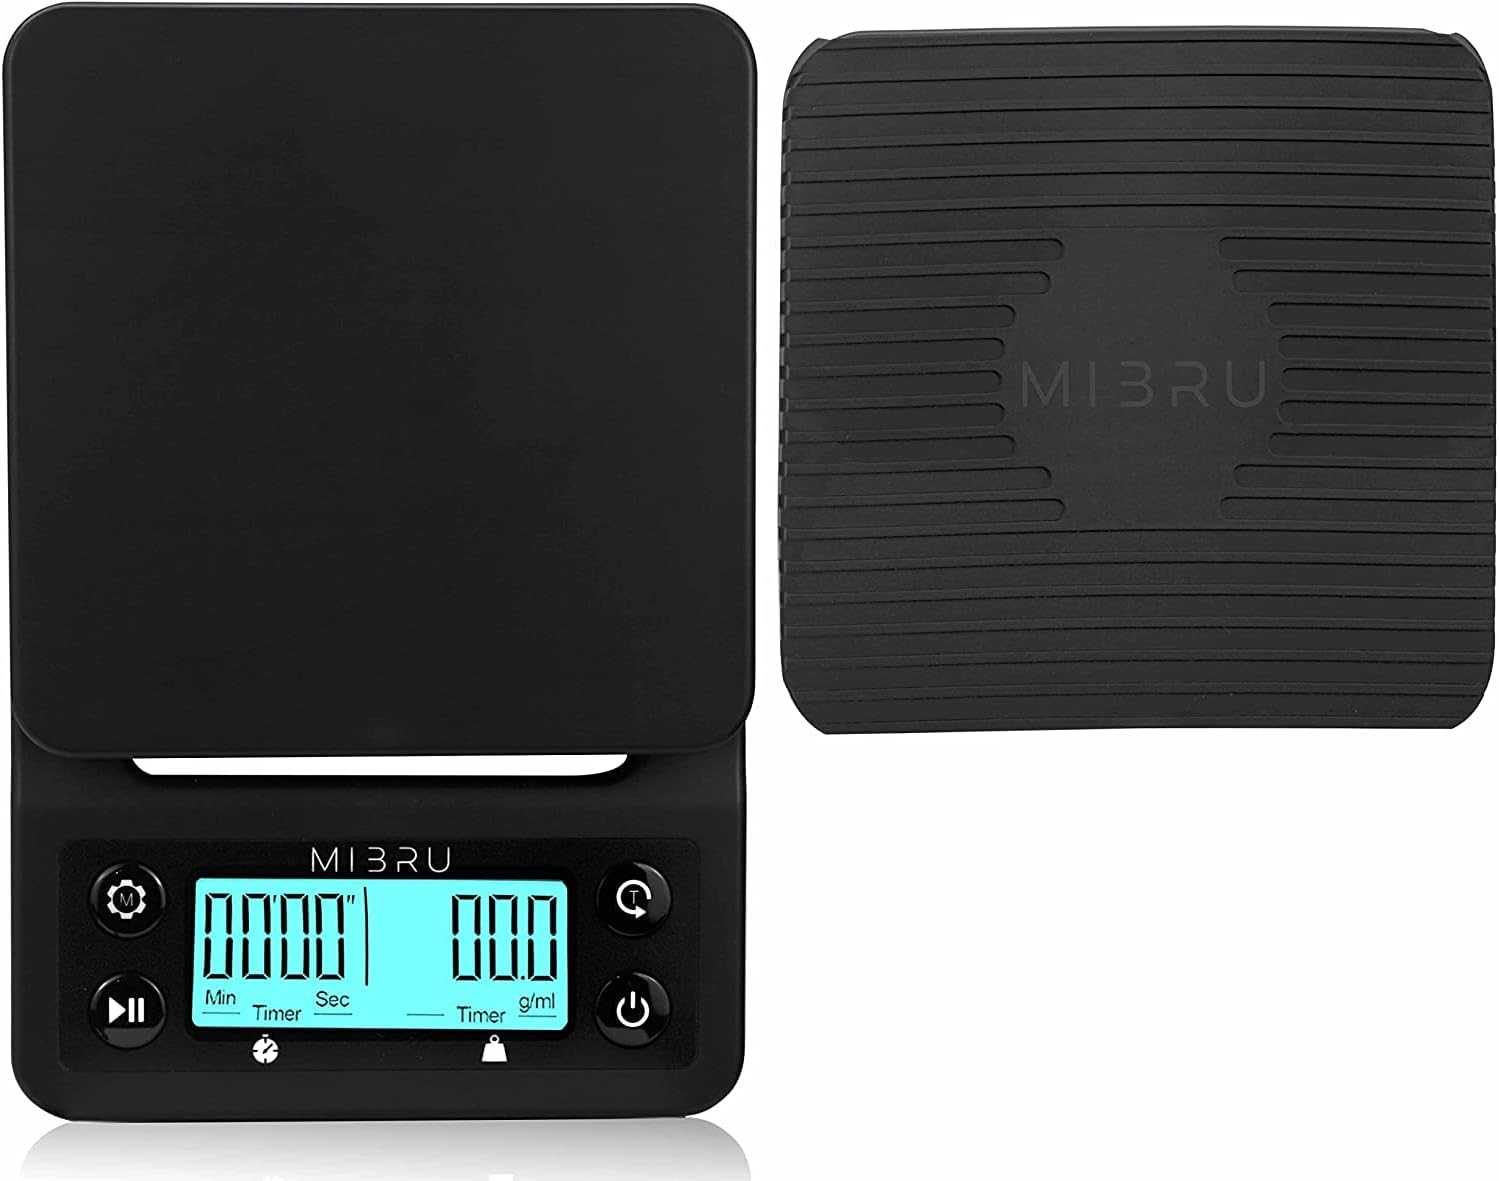 MIBRU Coffee Scale | Kitchen Scale | Pour Over V60 Drip Coffee | Food Baking Table Weighting with Tare timing Function Digital Precise Graduation Waterproof Mat 0.1-3000G ميزان قهوة رقمي مع مؤقت